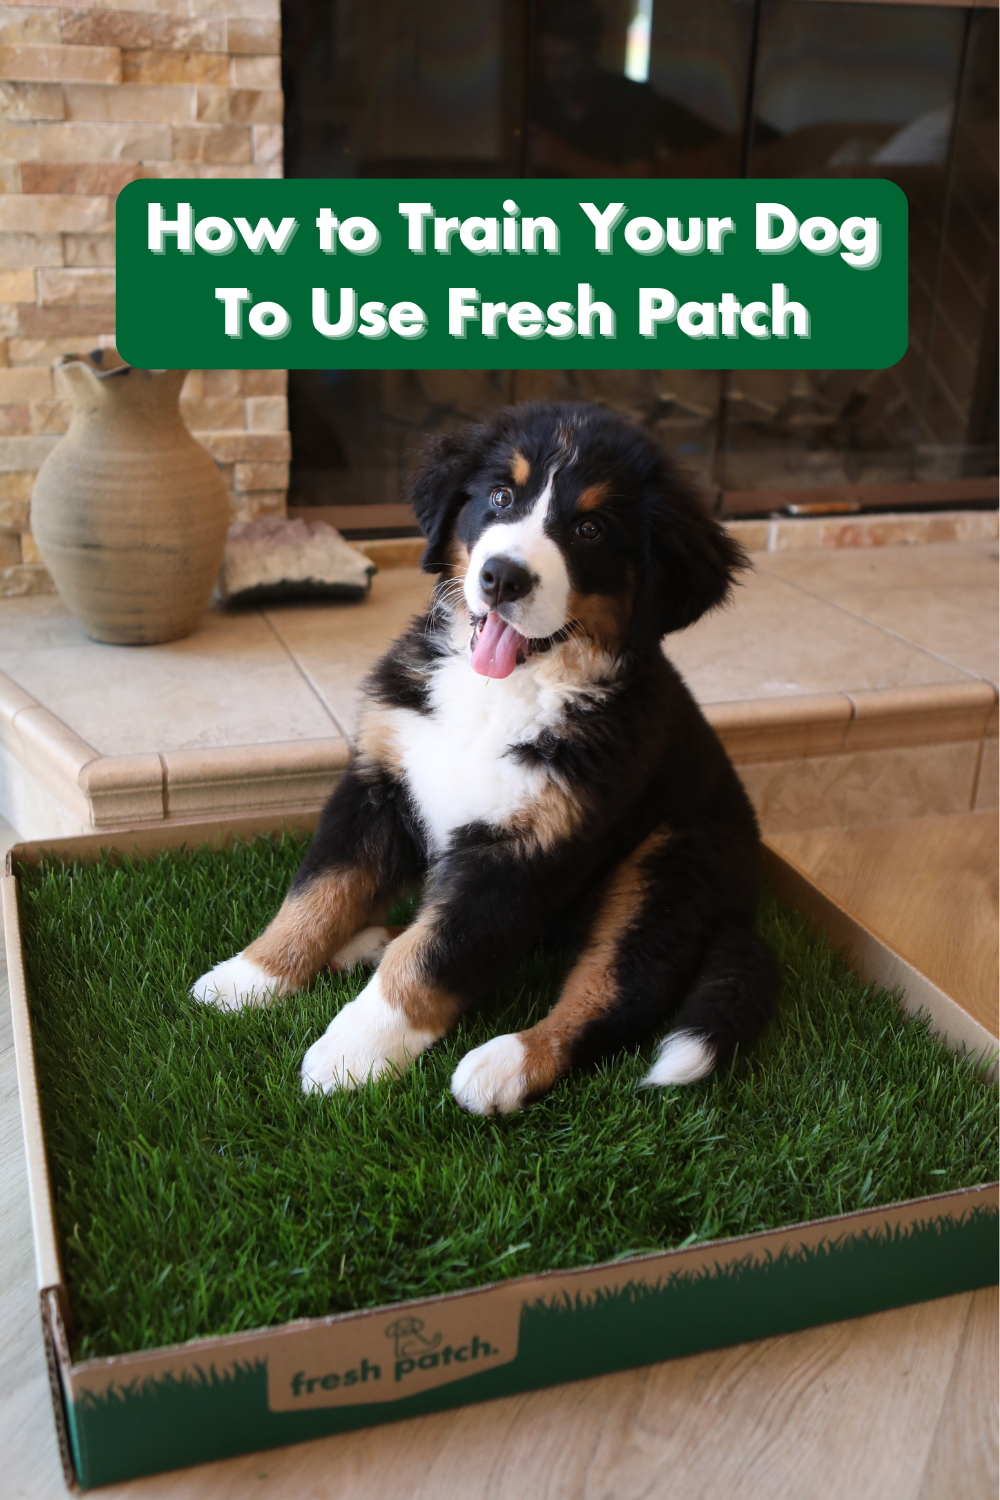 How to Train Your Dog To Use Fresh Patch